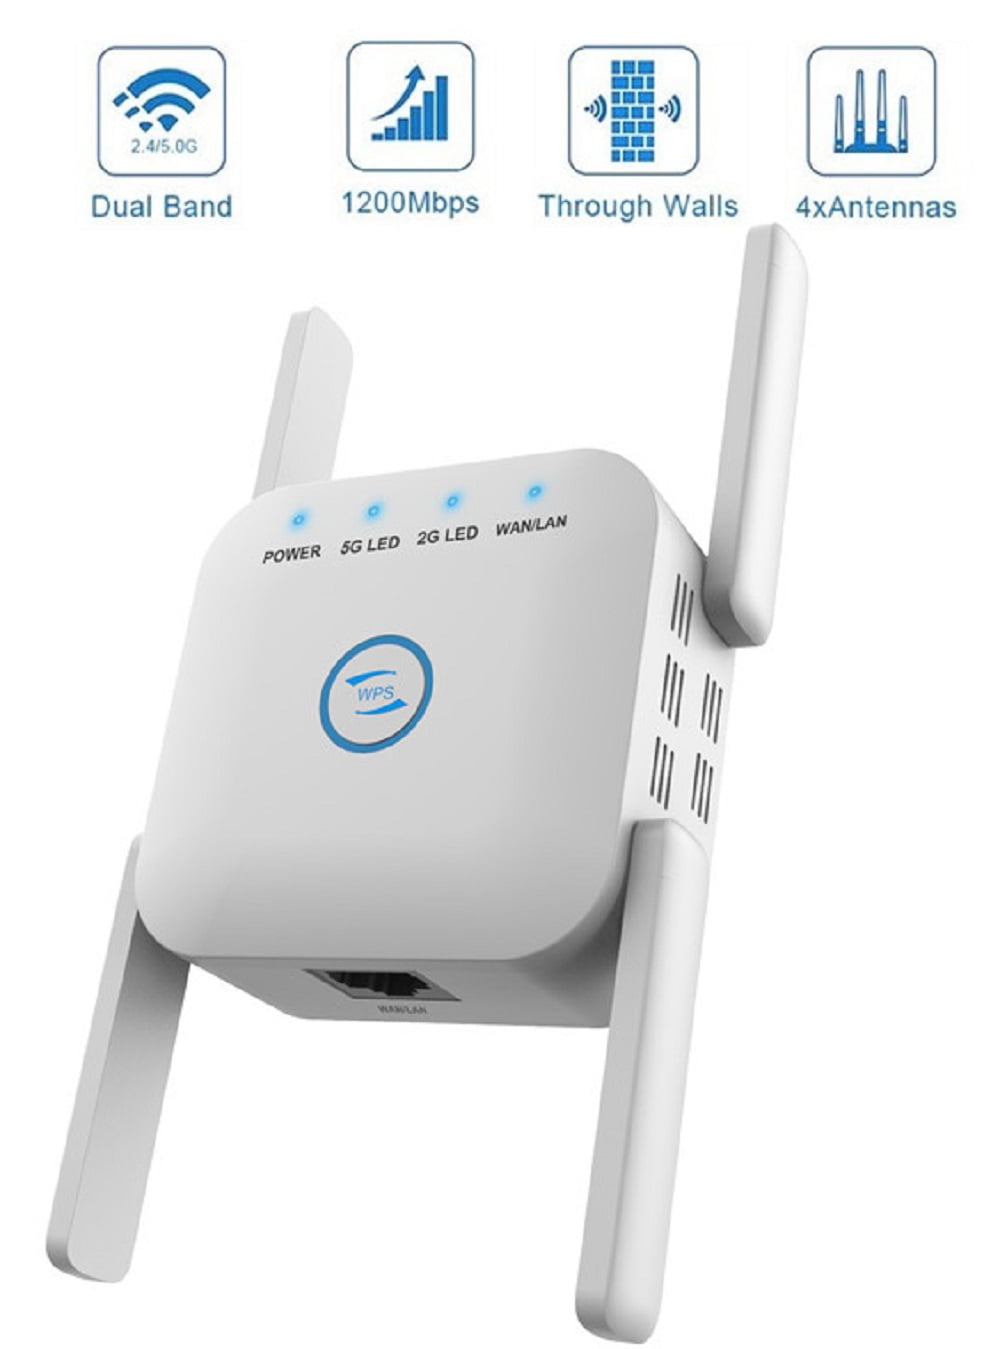 5G & 2.4G WLAN Amplifier Access Point Compatible with All Devices WiFi Extender Booster WLAN Repeater Cover up to 3000 m² for Socket WPS 2100 Mbit/s Internet Amplifier with LAN Connection 